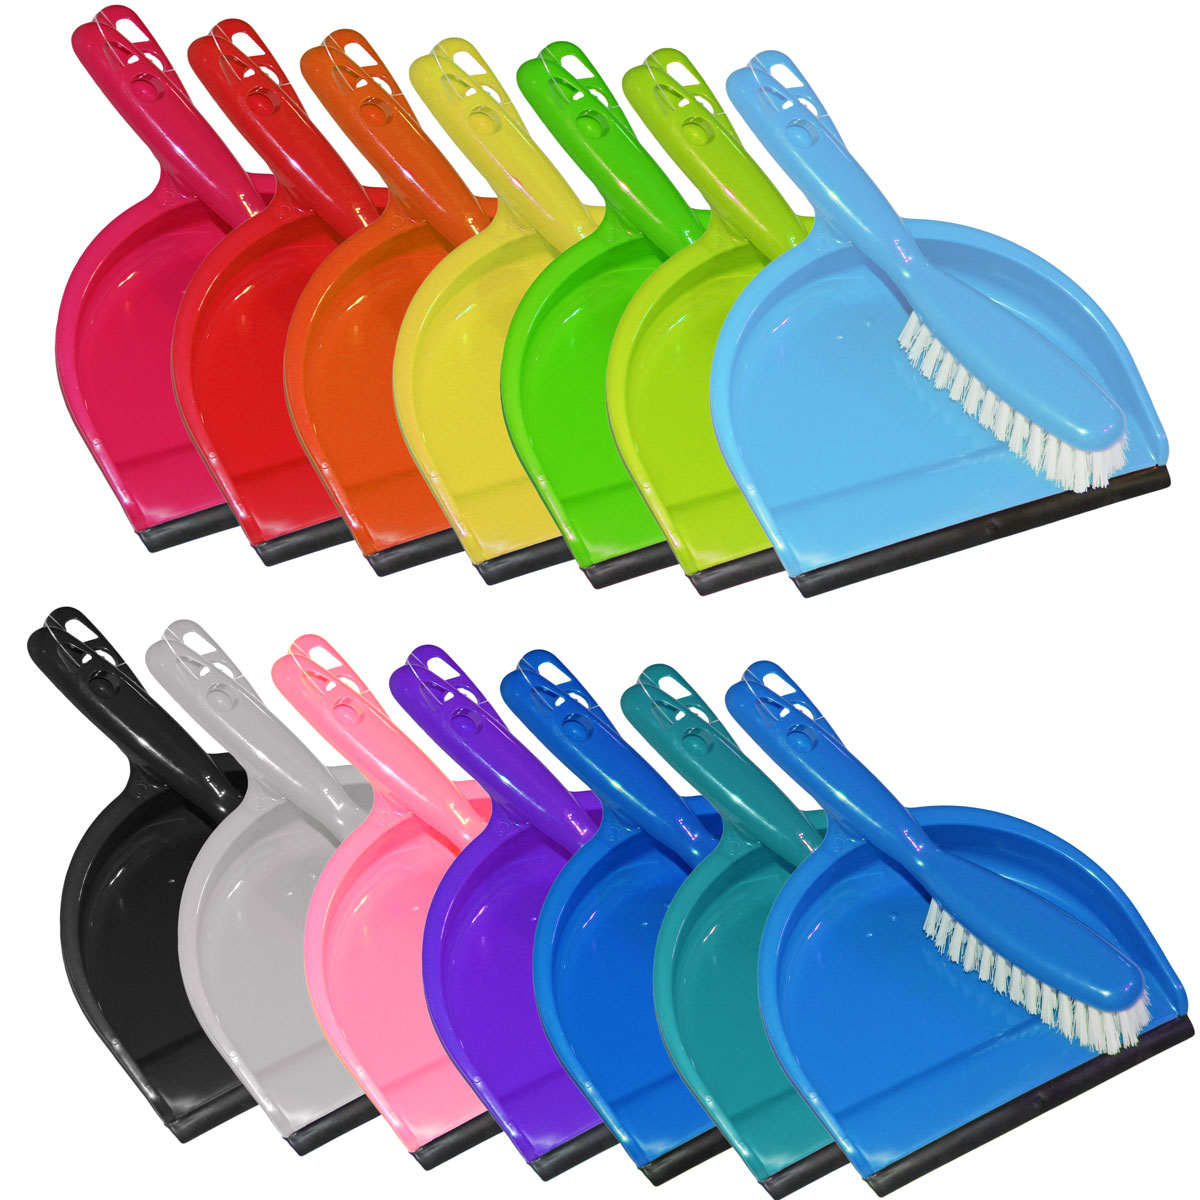 Dustpans and Broom in Assorted Colors